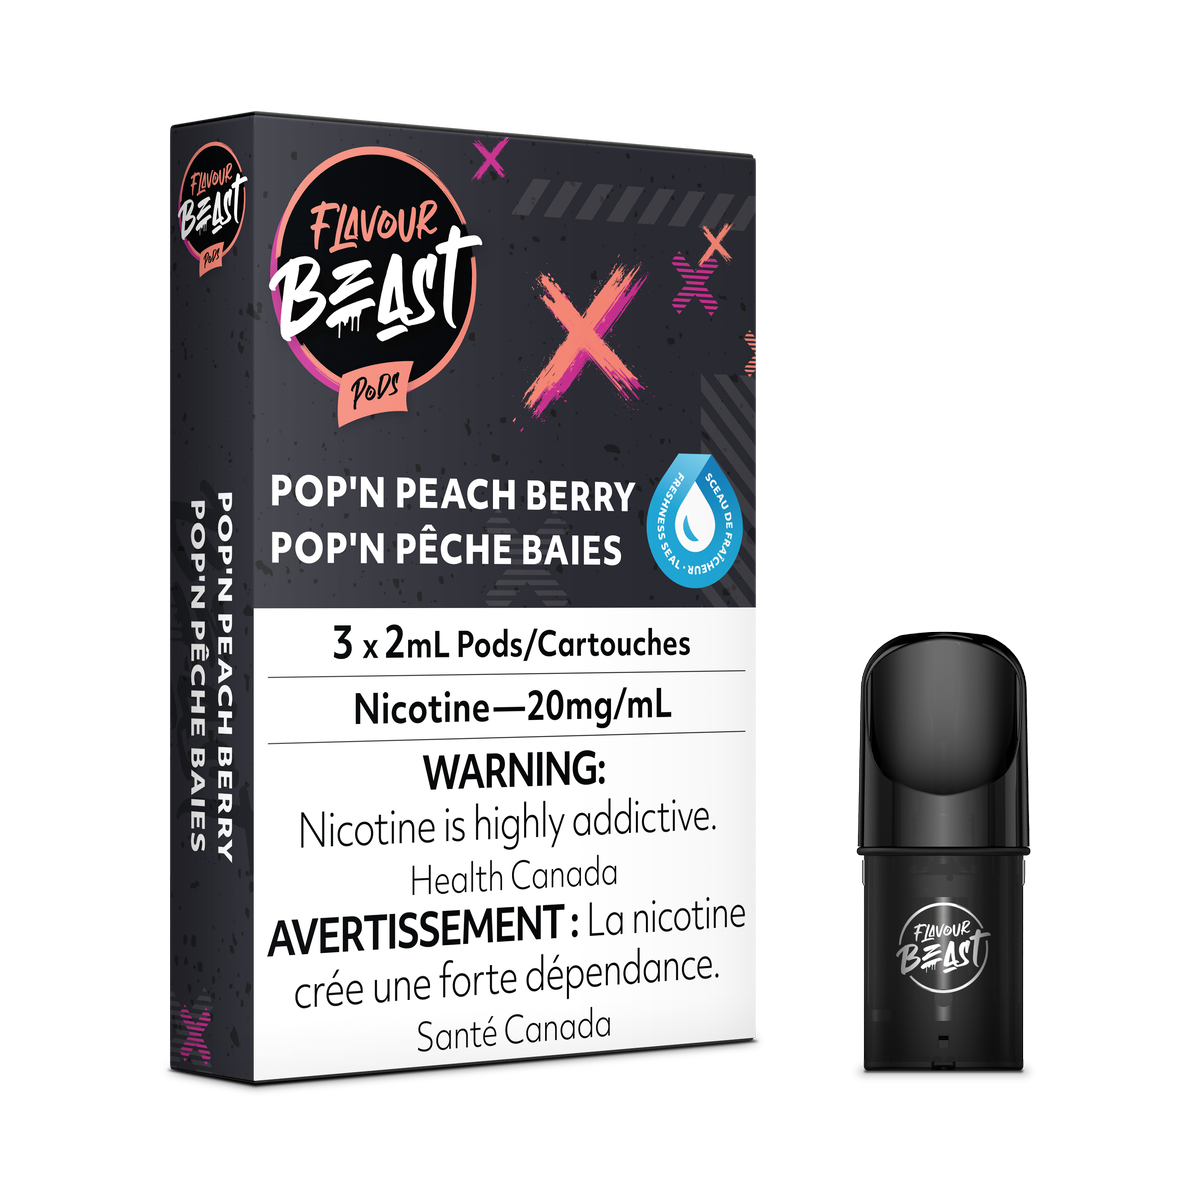 Flavour Beast - Packin' Peach Berry Pods